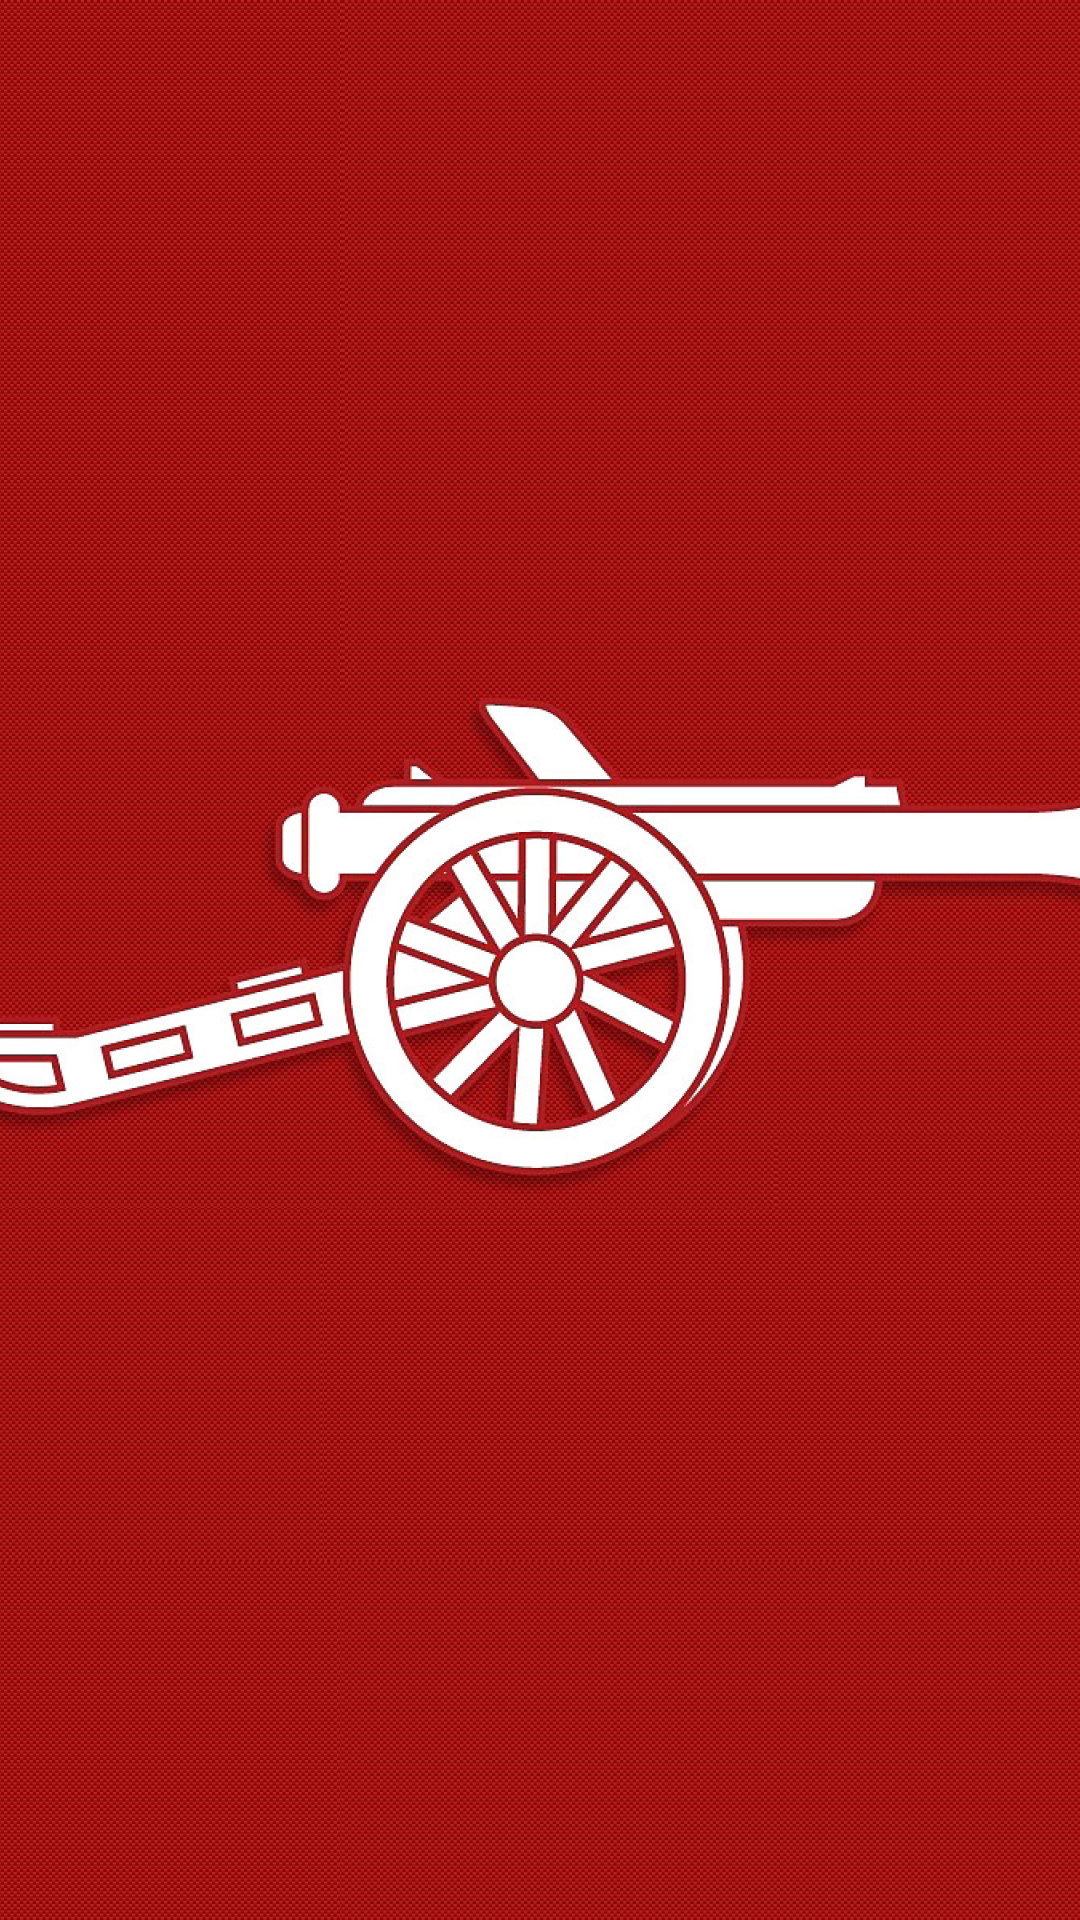 Images Of Arsenal Logo Wallpapers 2016 SC